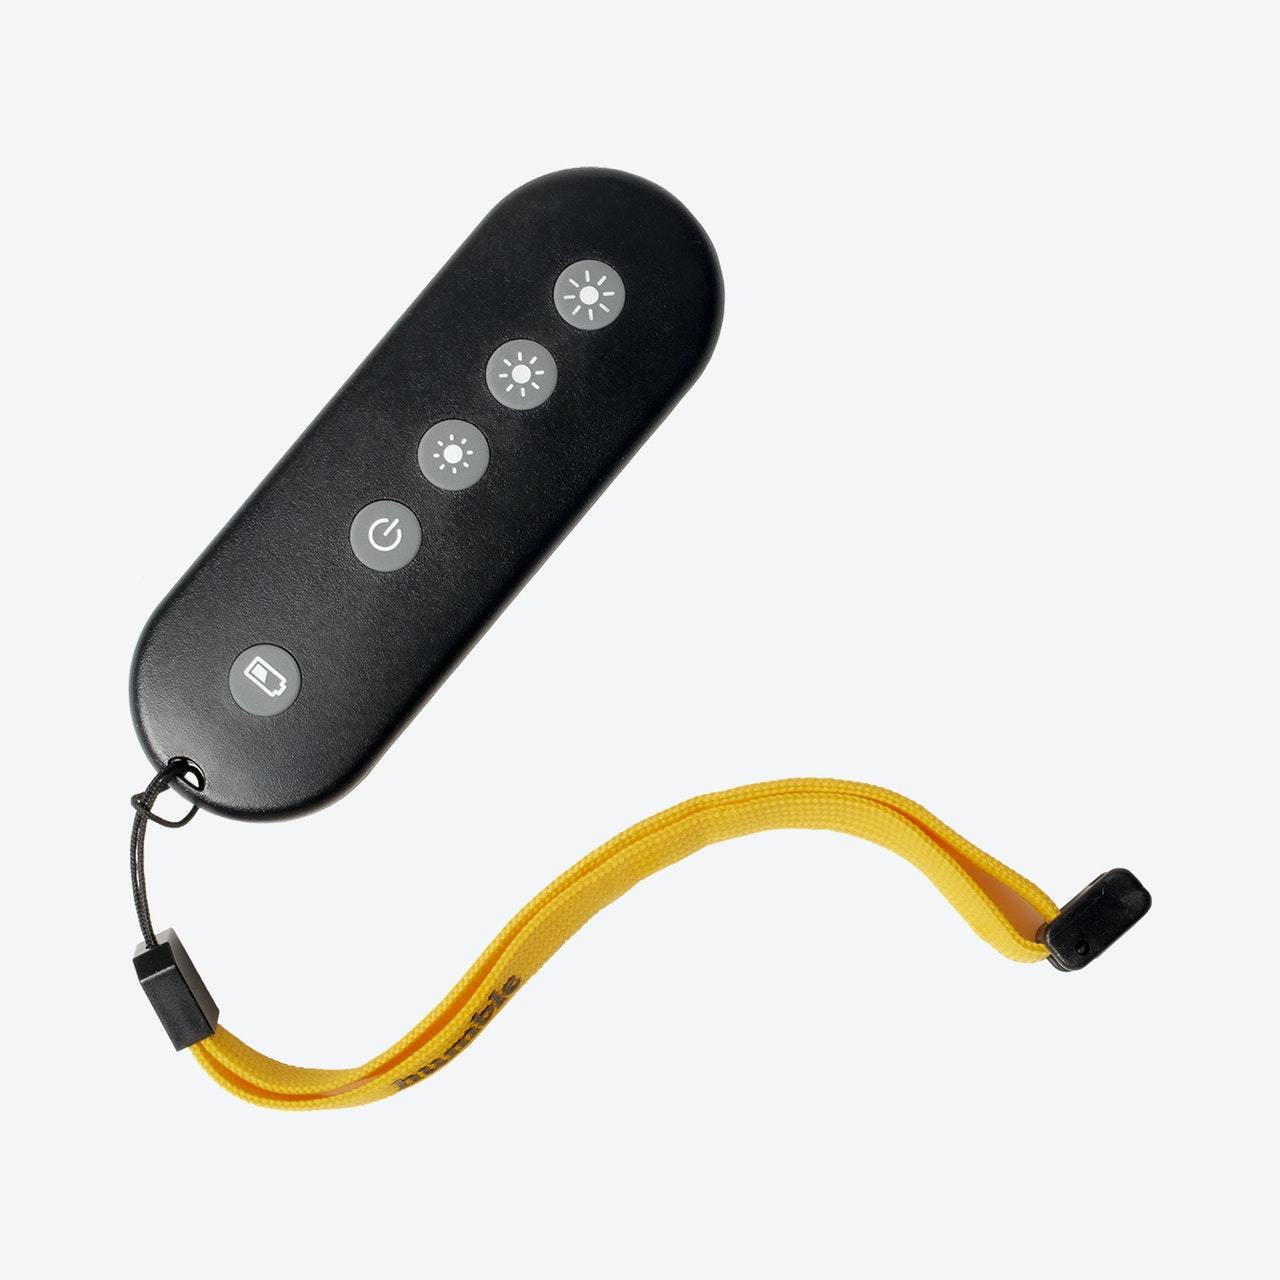 Humble One Remote Control